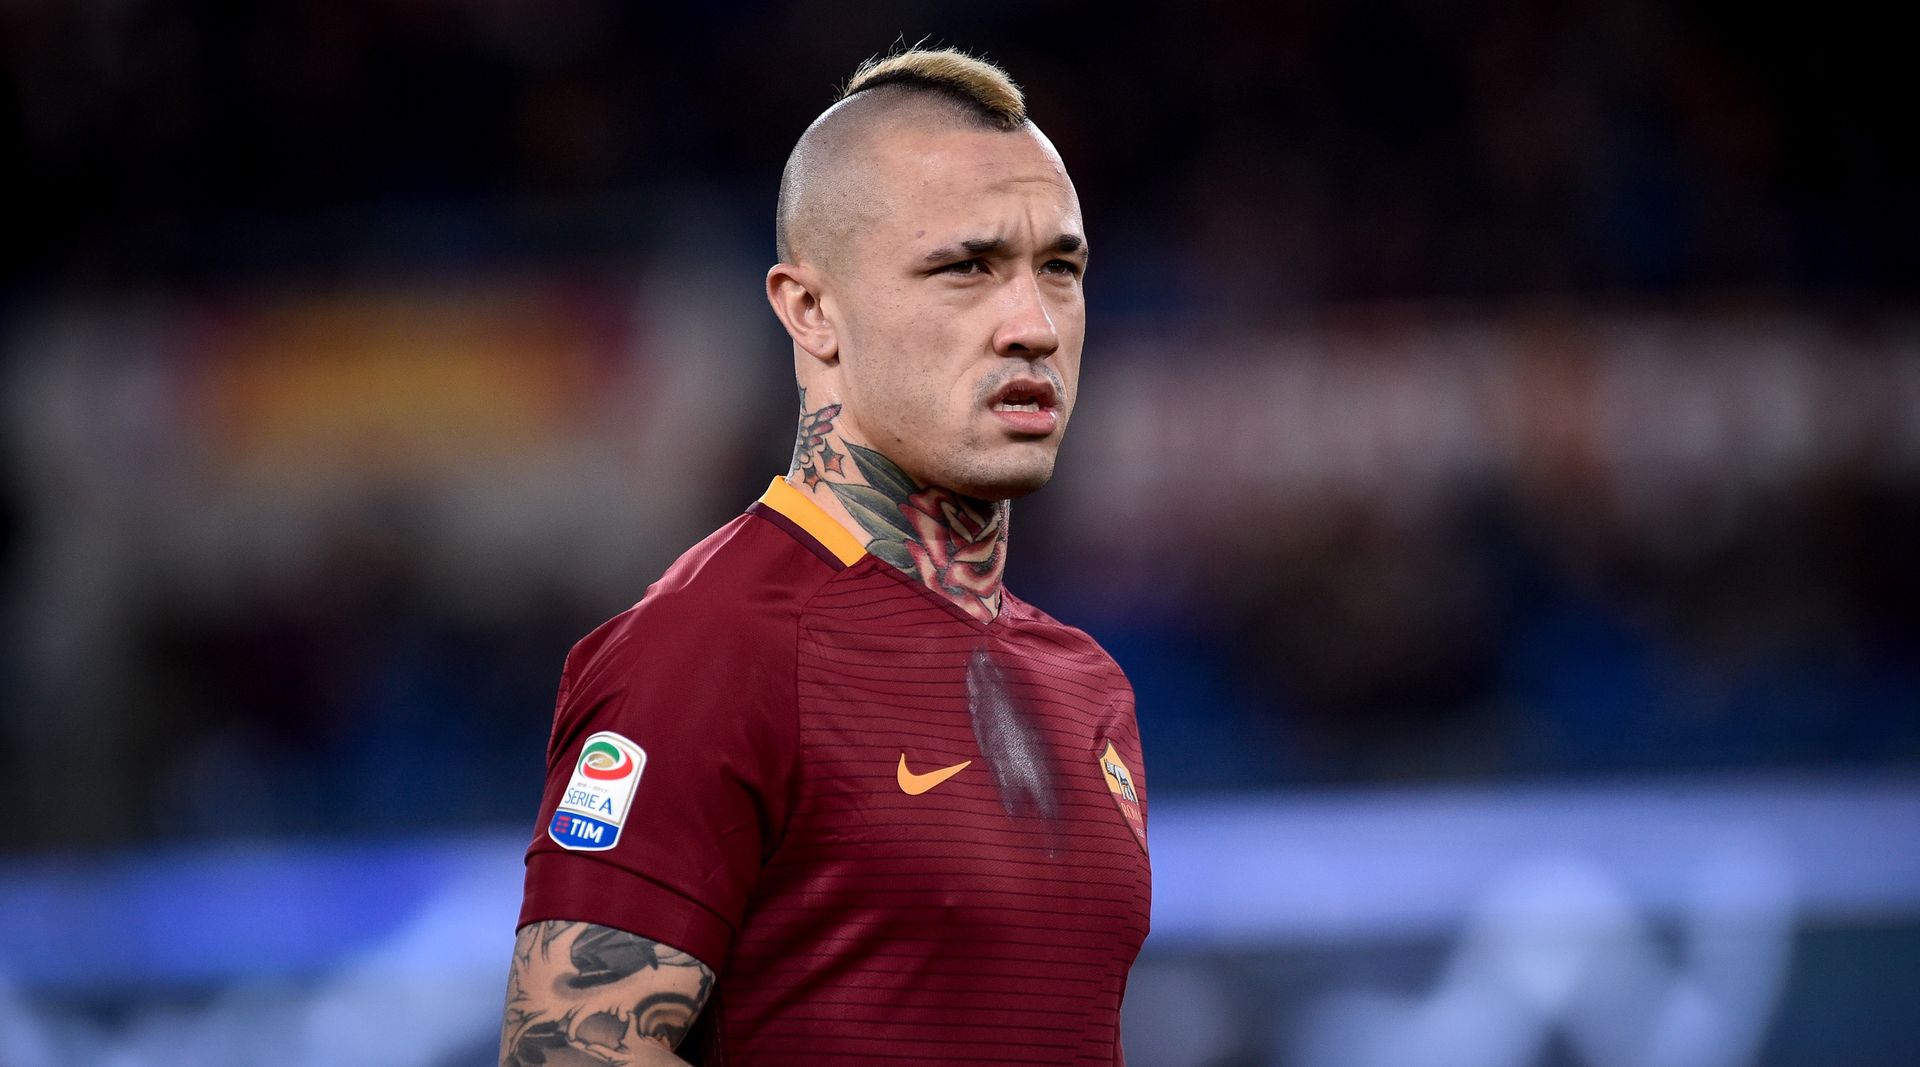 <p>                     Former Belgium international Radja Nainggolan began his professional career in Italy with Serie B Piacenza, spending time in Serie A with Cagliari, Roma and Inter Milan over the course of the 10s.                   </p>                                      <p>                     And it was with the Giallorossi that the mohawked midfield aggressor played his best football, making 155 league appearances and featuring in every Serie A Team of the Year from 2015 to 2018.                   </p>